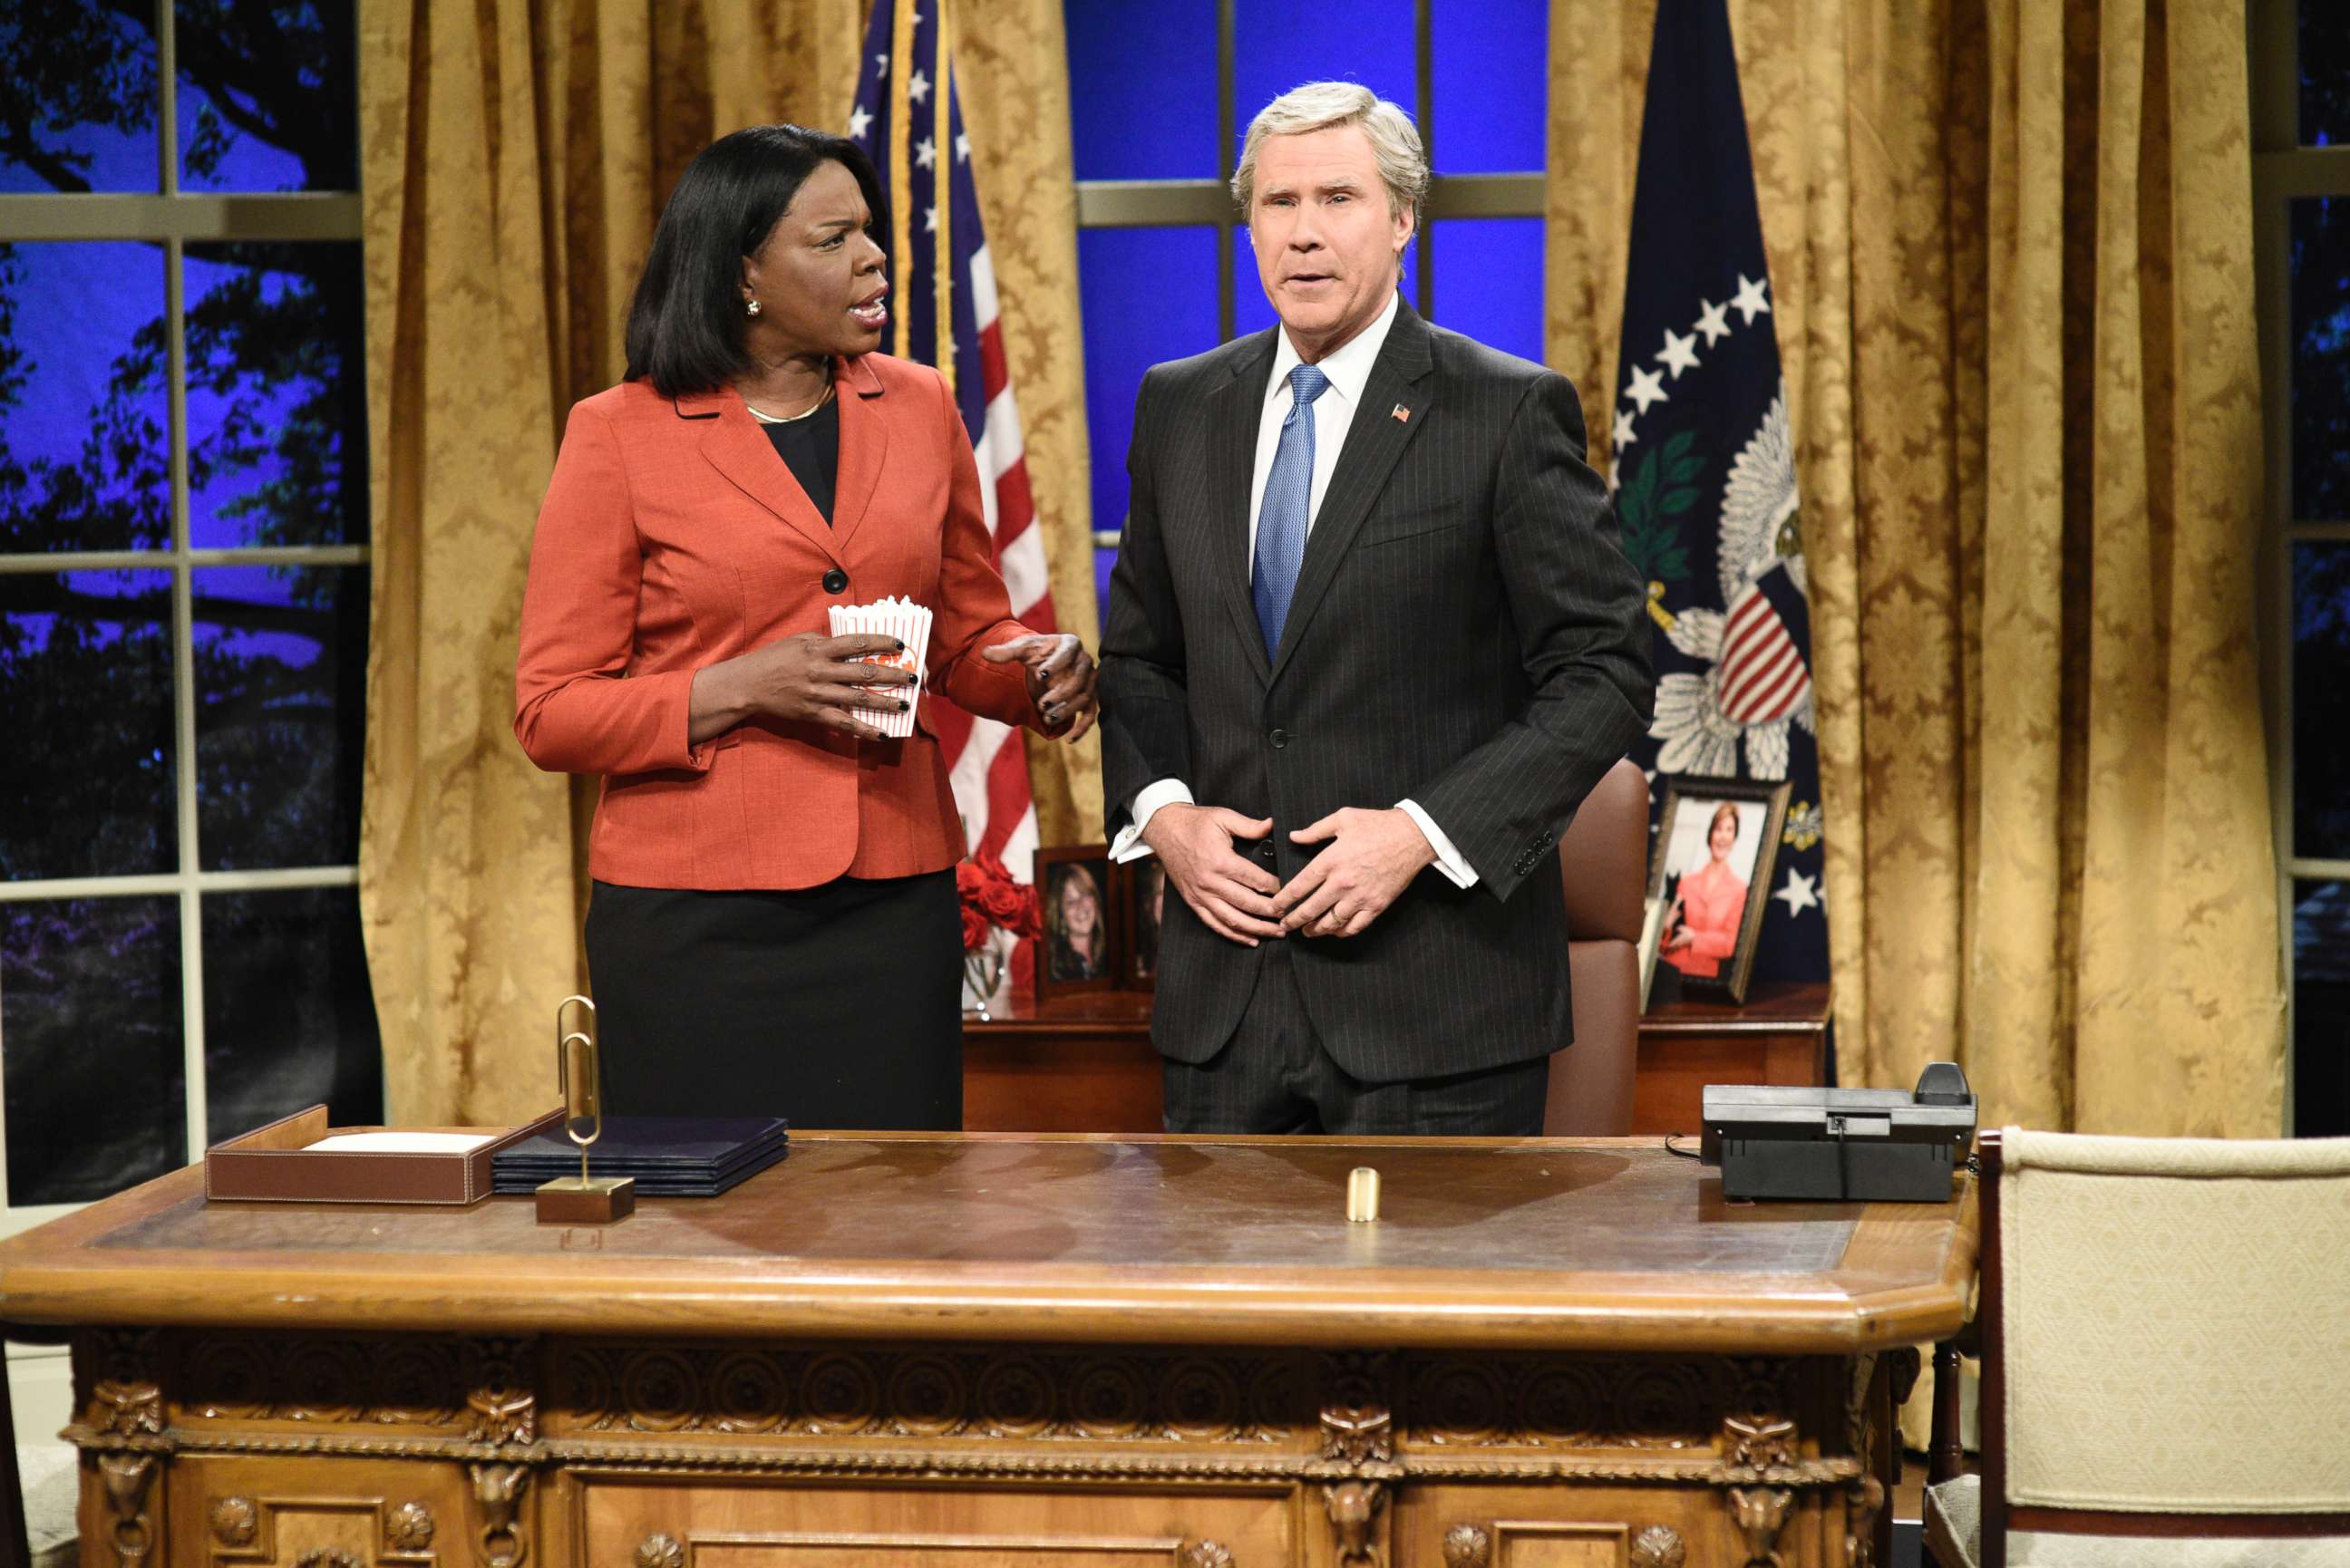 PHOTO: SATURDAY NIGHT LIVE -- "Will Ferrell" Episode 1737 -- Pictured: (l-r) Leslie Jones as Condoleezza Rice, Will Ferrell as George W. Bush during the "Cold Open" in Studio 8H on Saturday, January 27, 2018